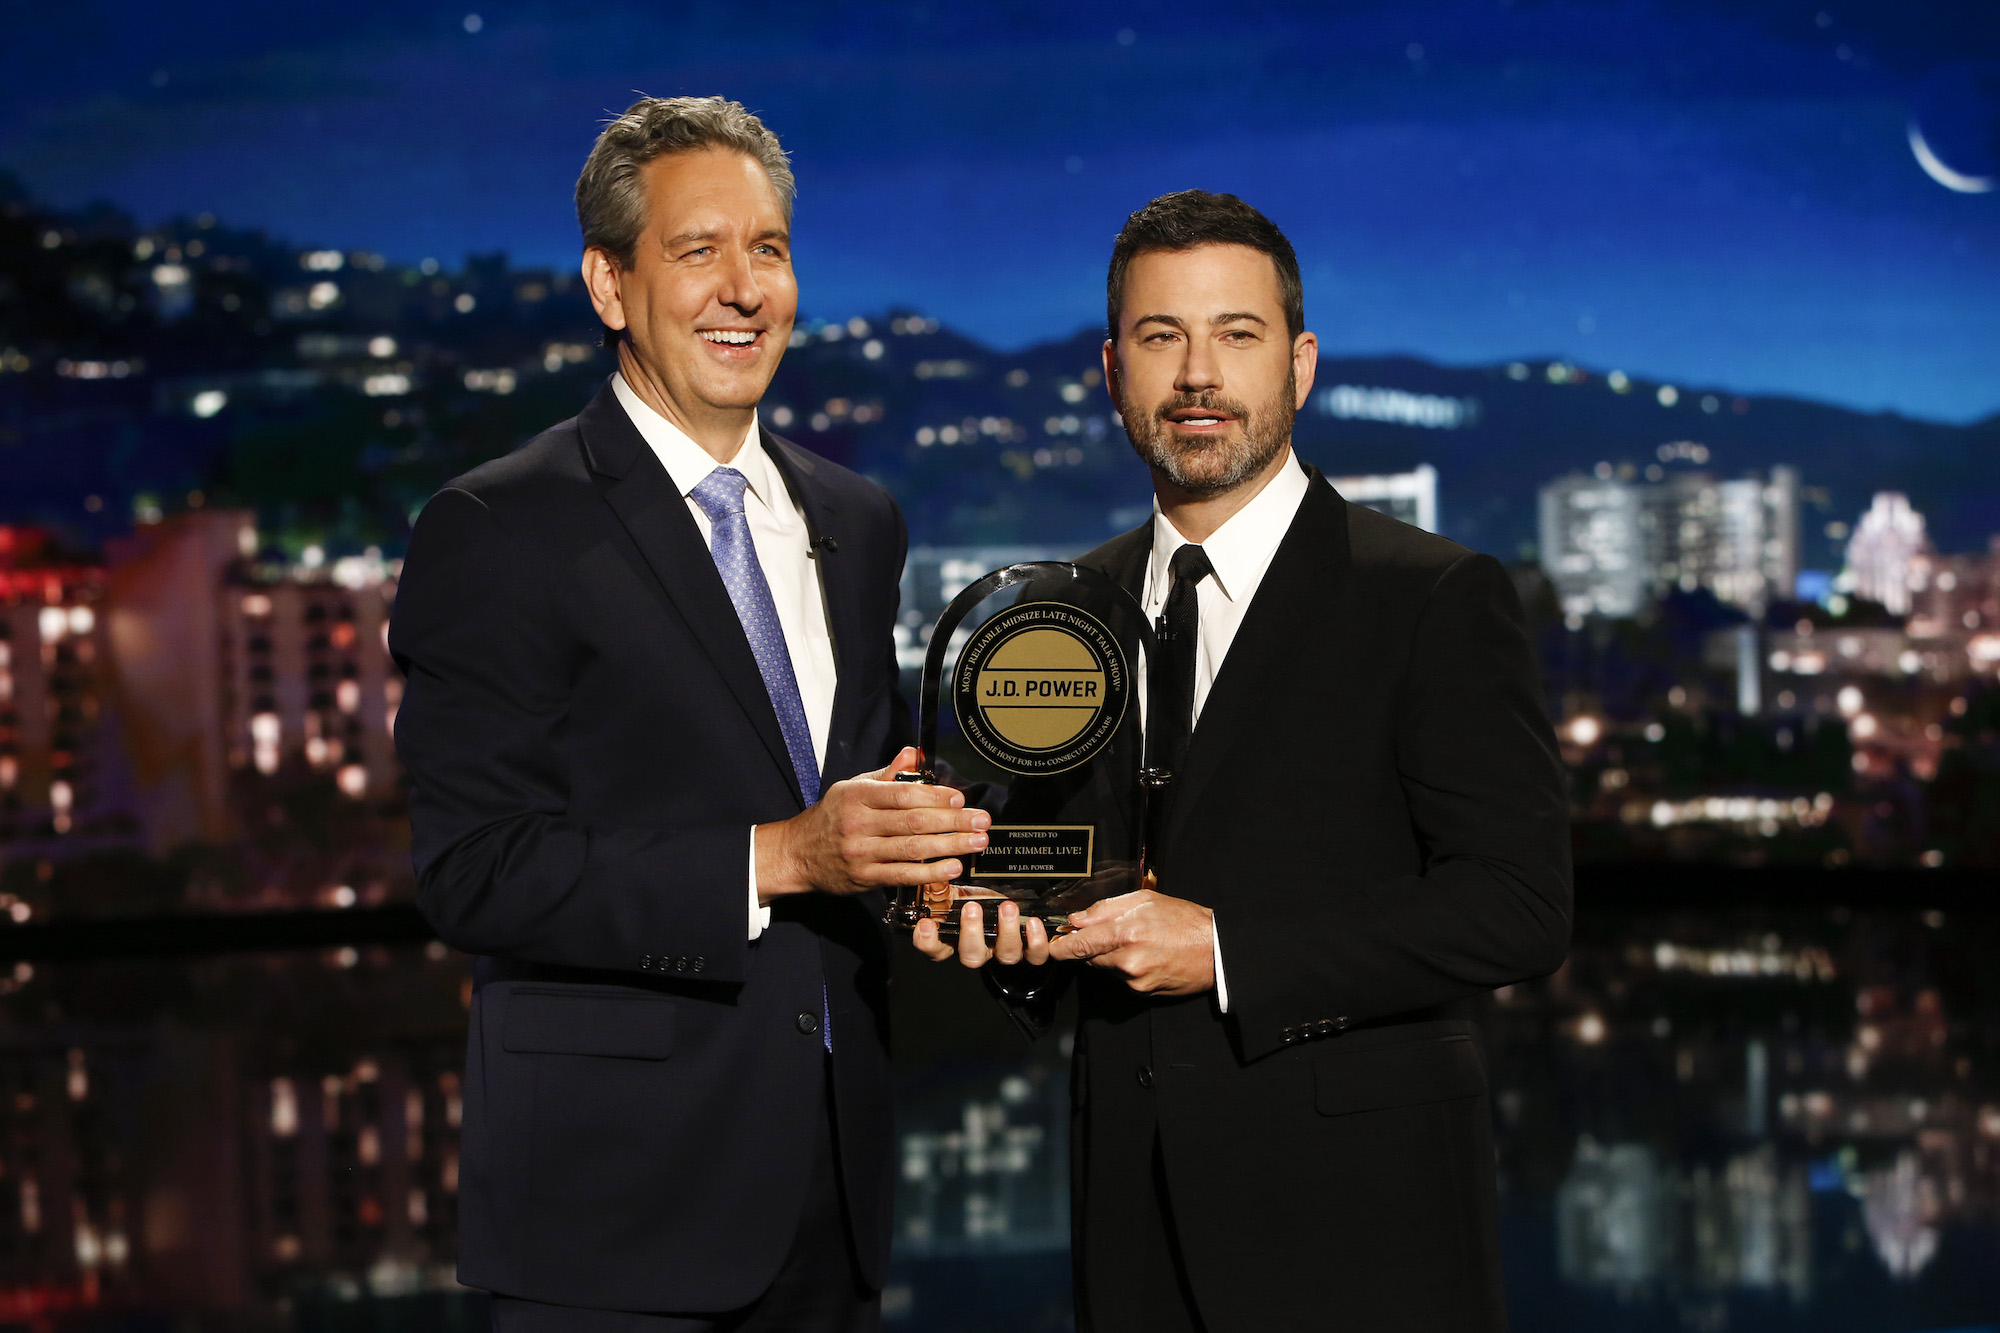 J.D. Power president and CEO Dave Habiger and TV host Jimmy Kimmel on the set of 'Jimmy Kimmel Live!' in 2018